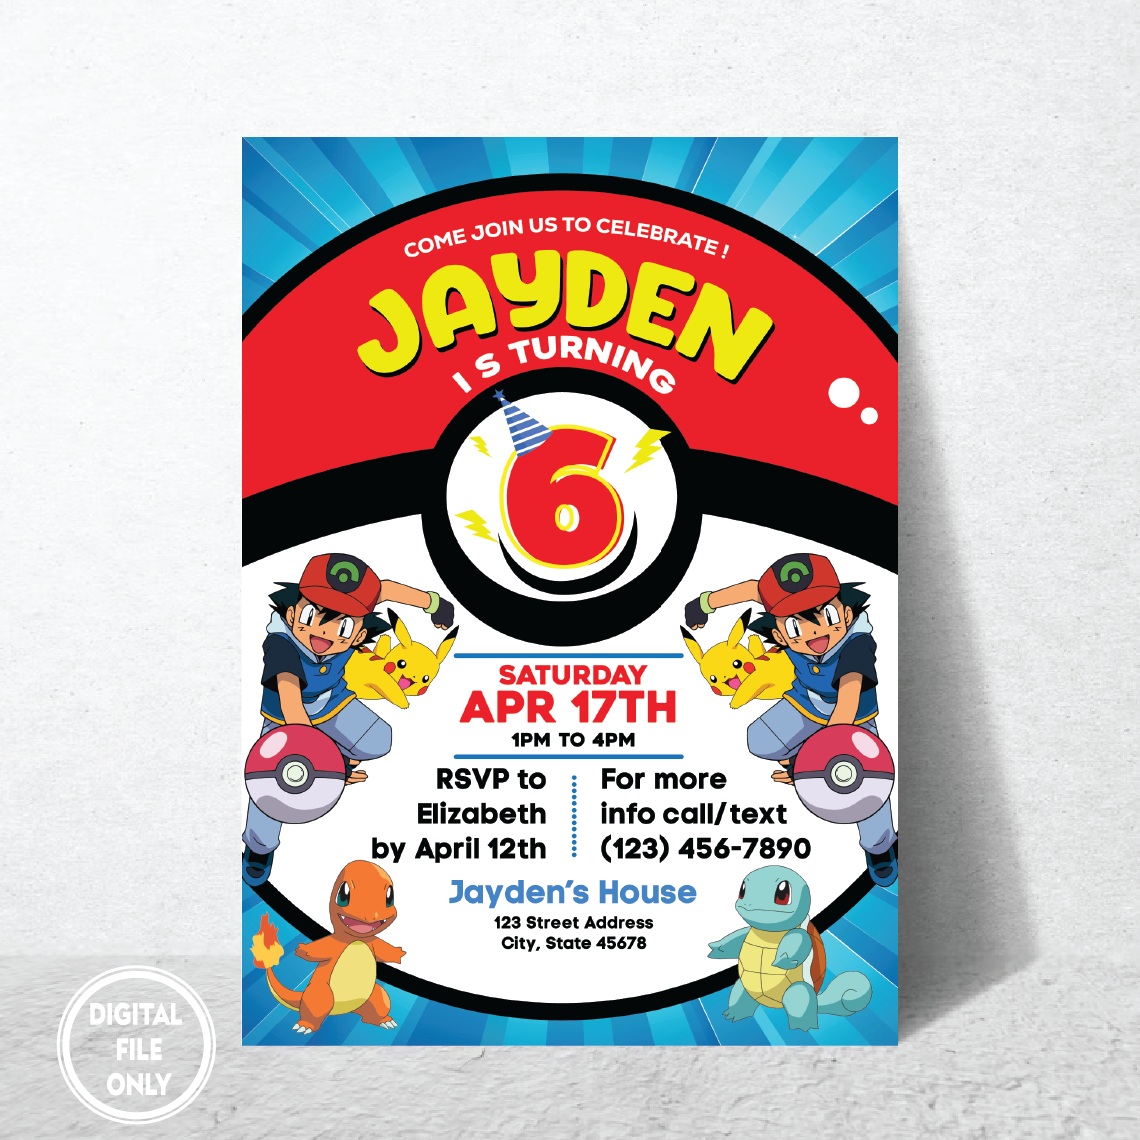 Personalized File Pokemone Birthday Invitation Digital, Instant Download, Printable, For Twins, Pikachu Invitation Digital, Invite, Party PNG File Only